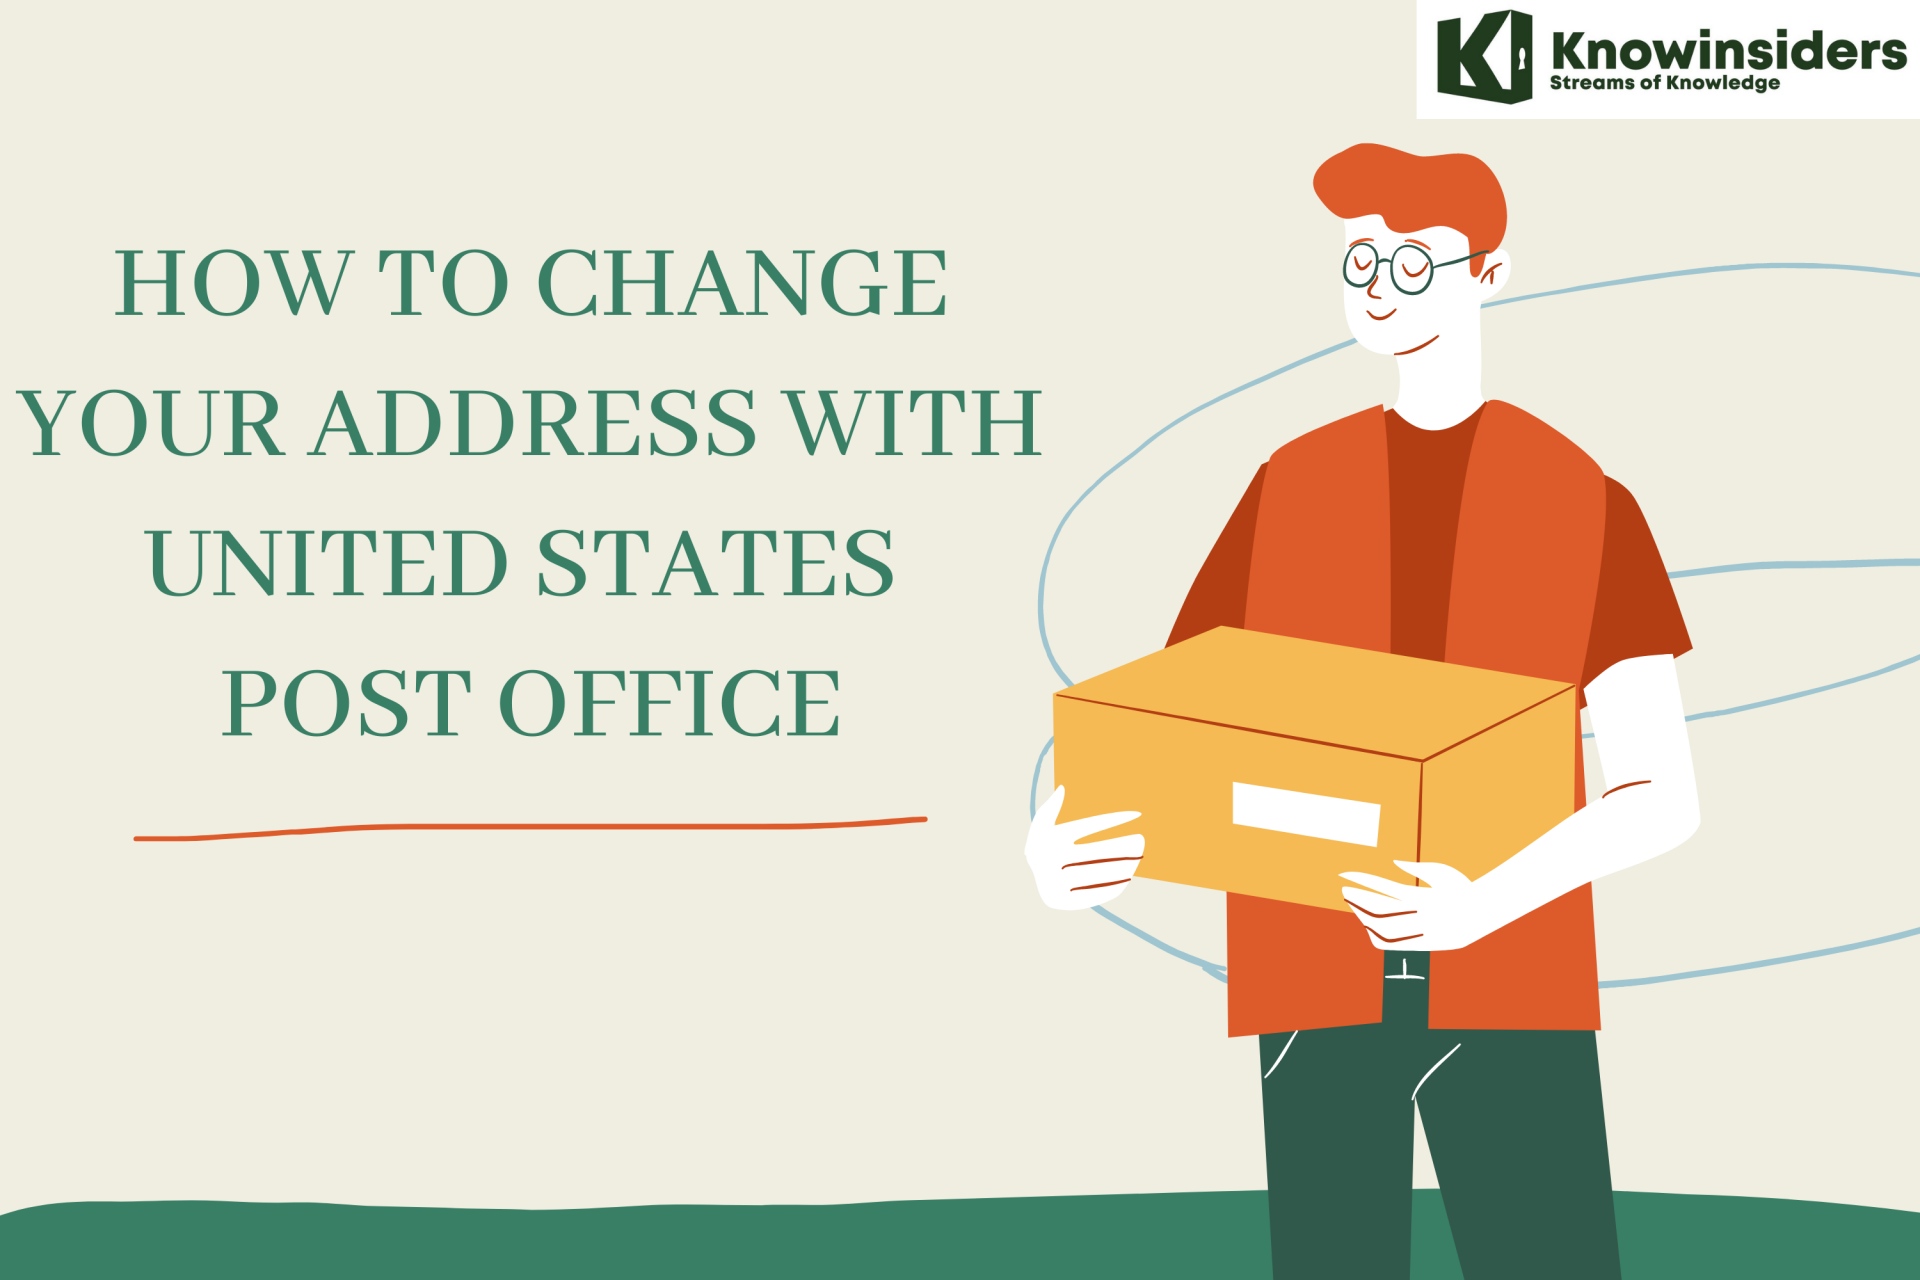 Simple Tips To Change Your Address With United States Post Office (USPS)